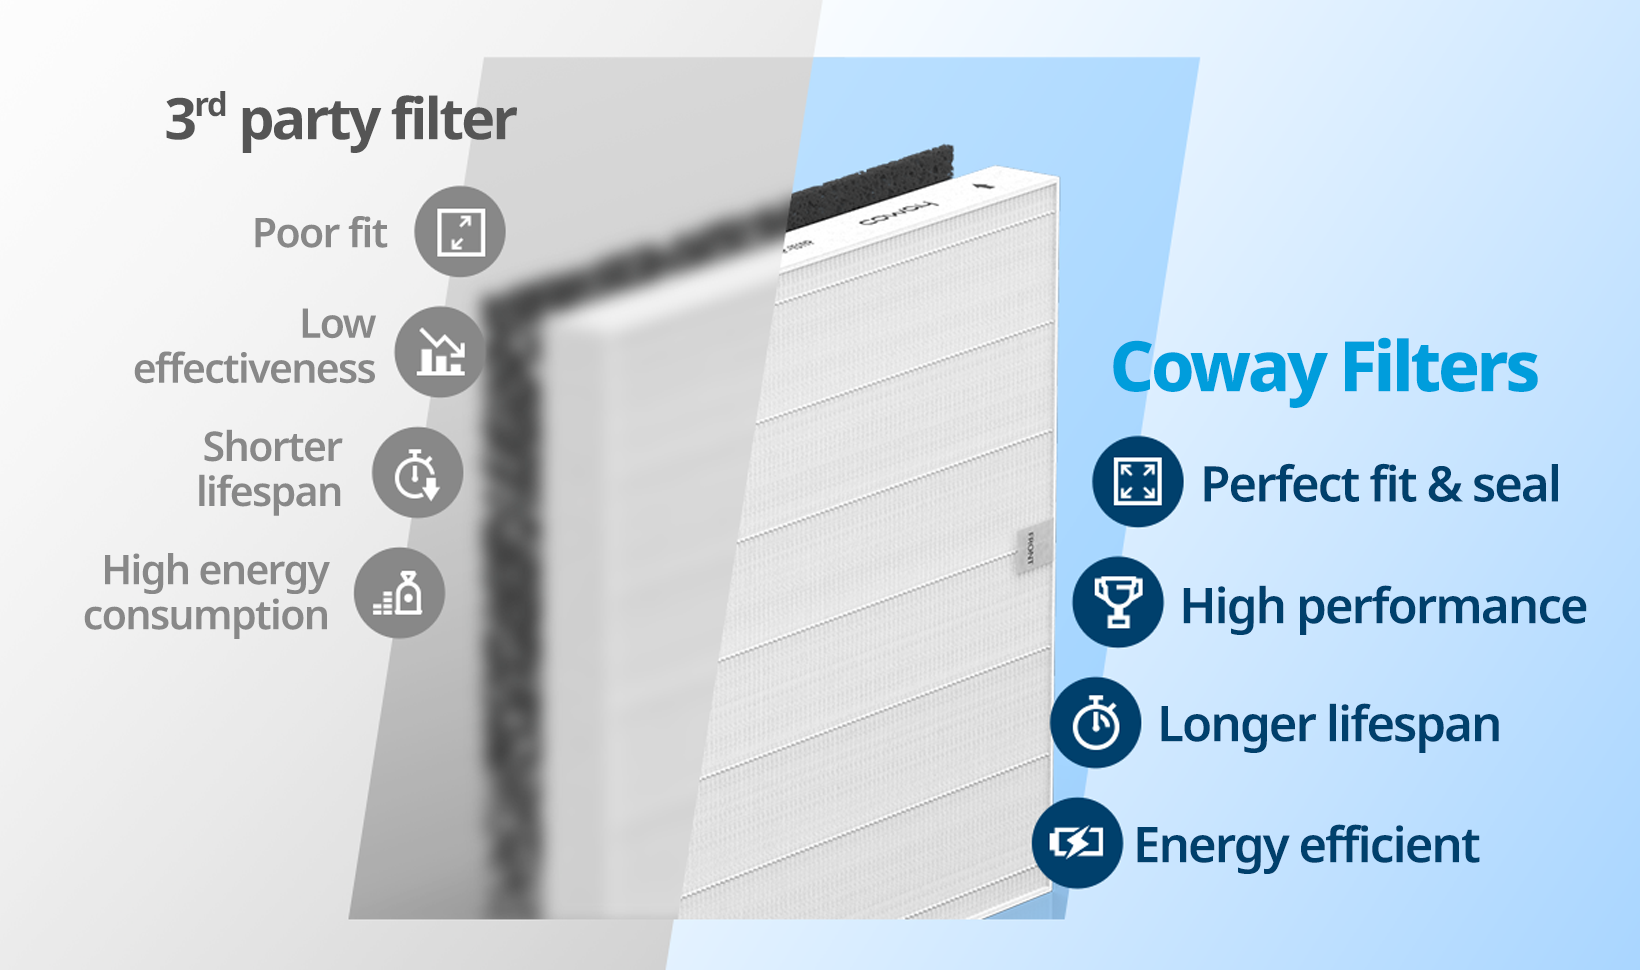 Maintain your Airmega with genuine Coway Filters for superior performance and longer lifespan.